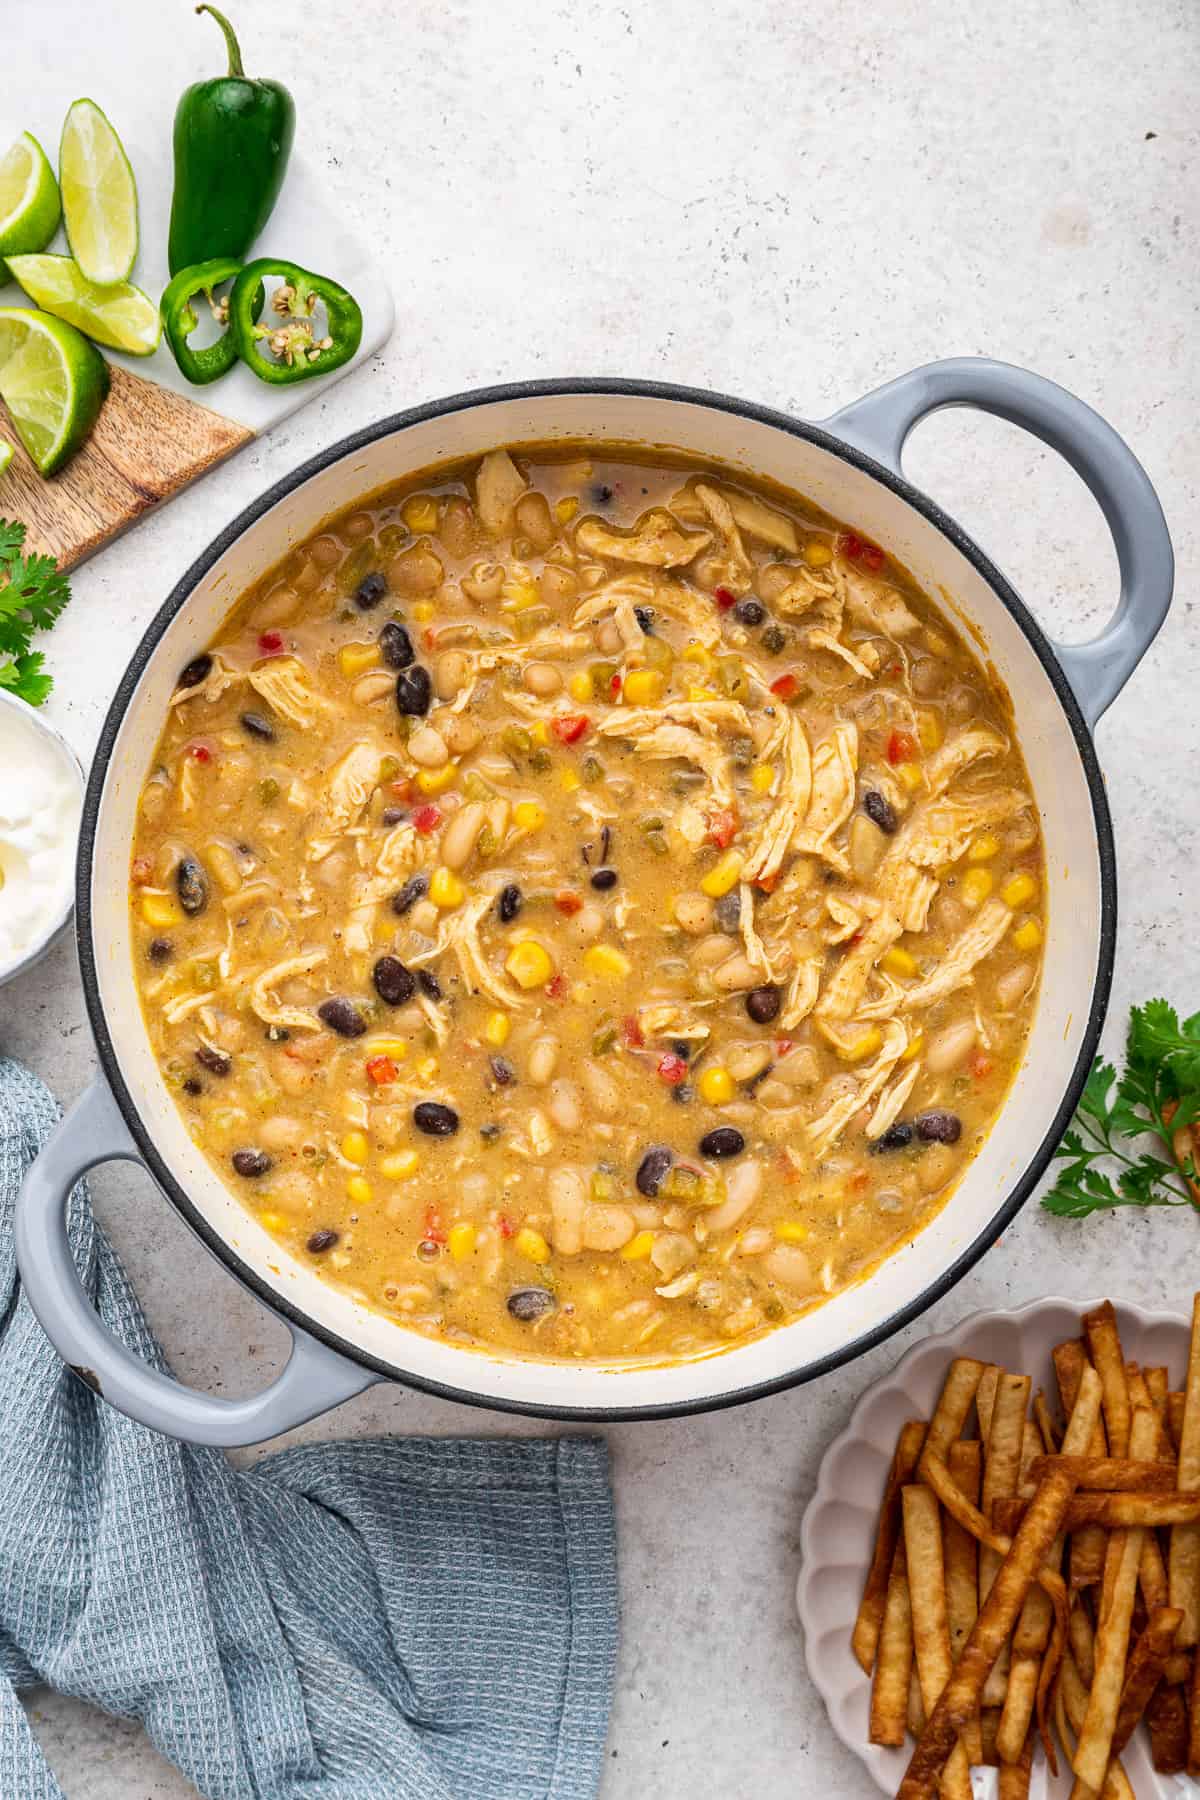 Post of chicken tortilla soup with chicken and beans.